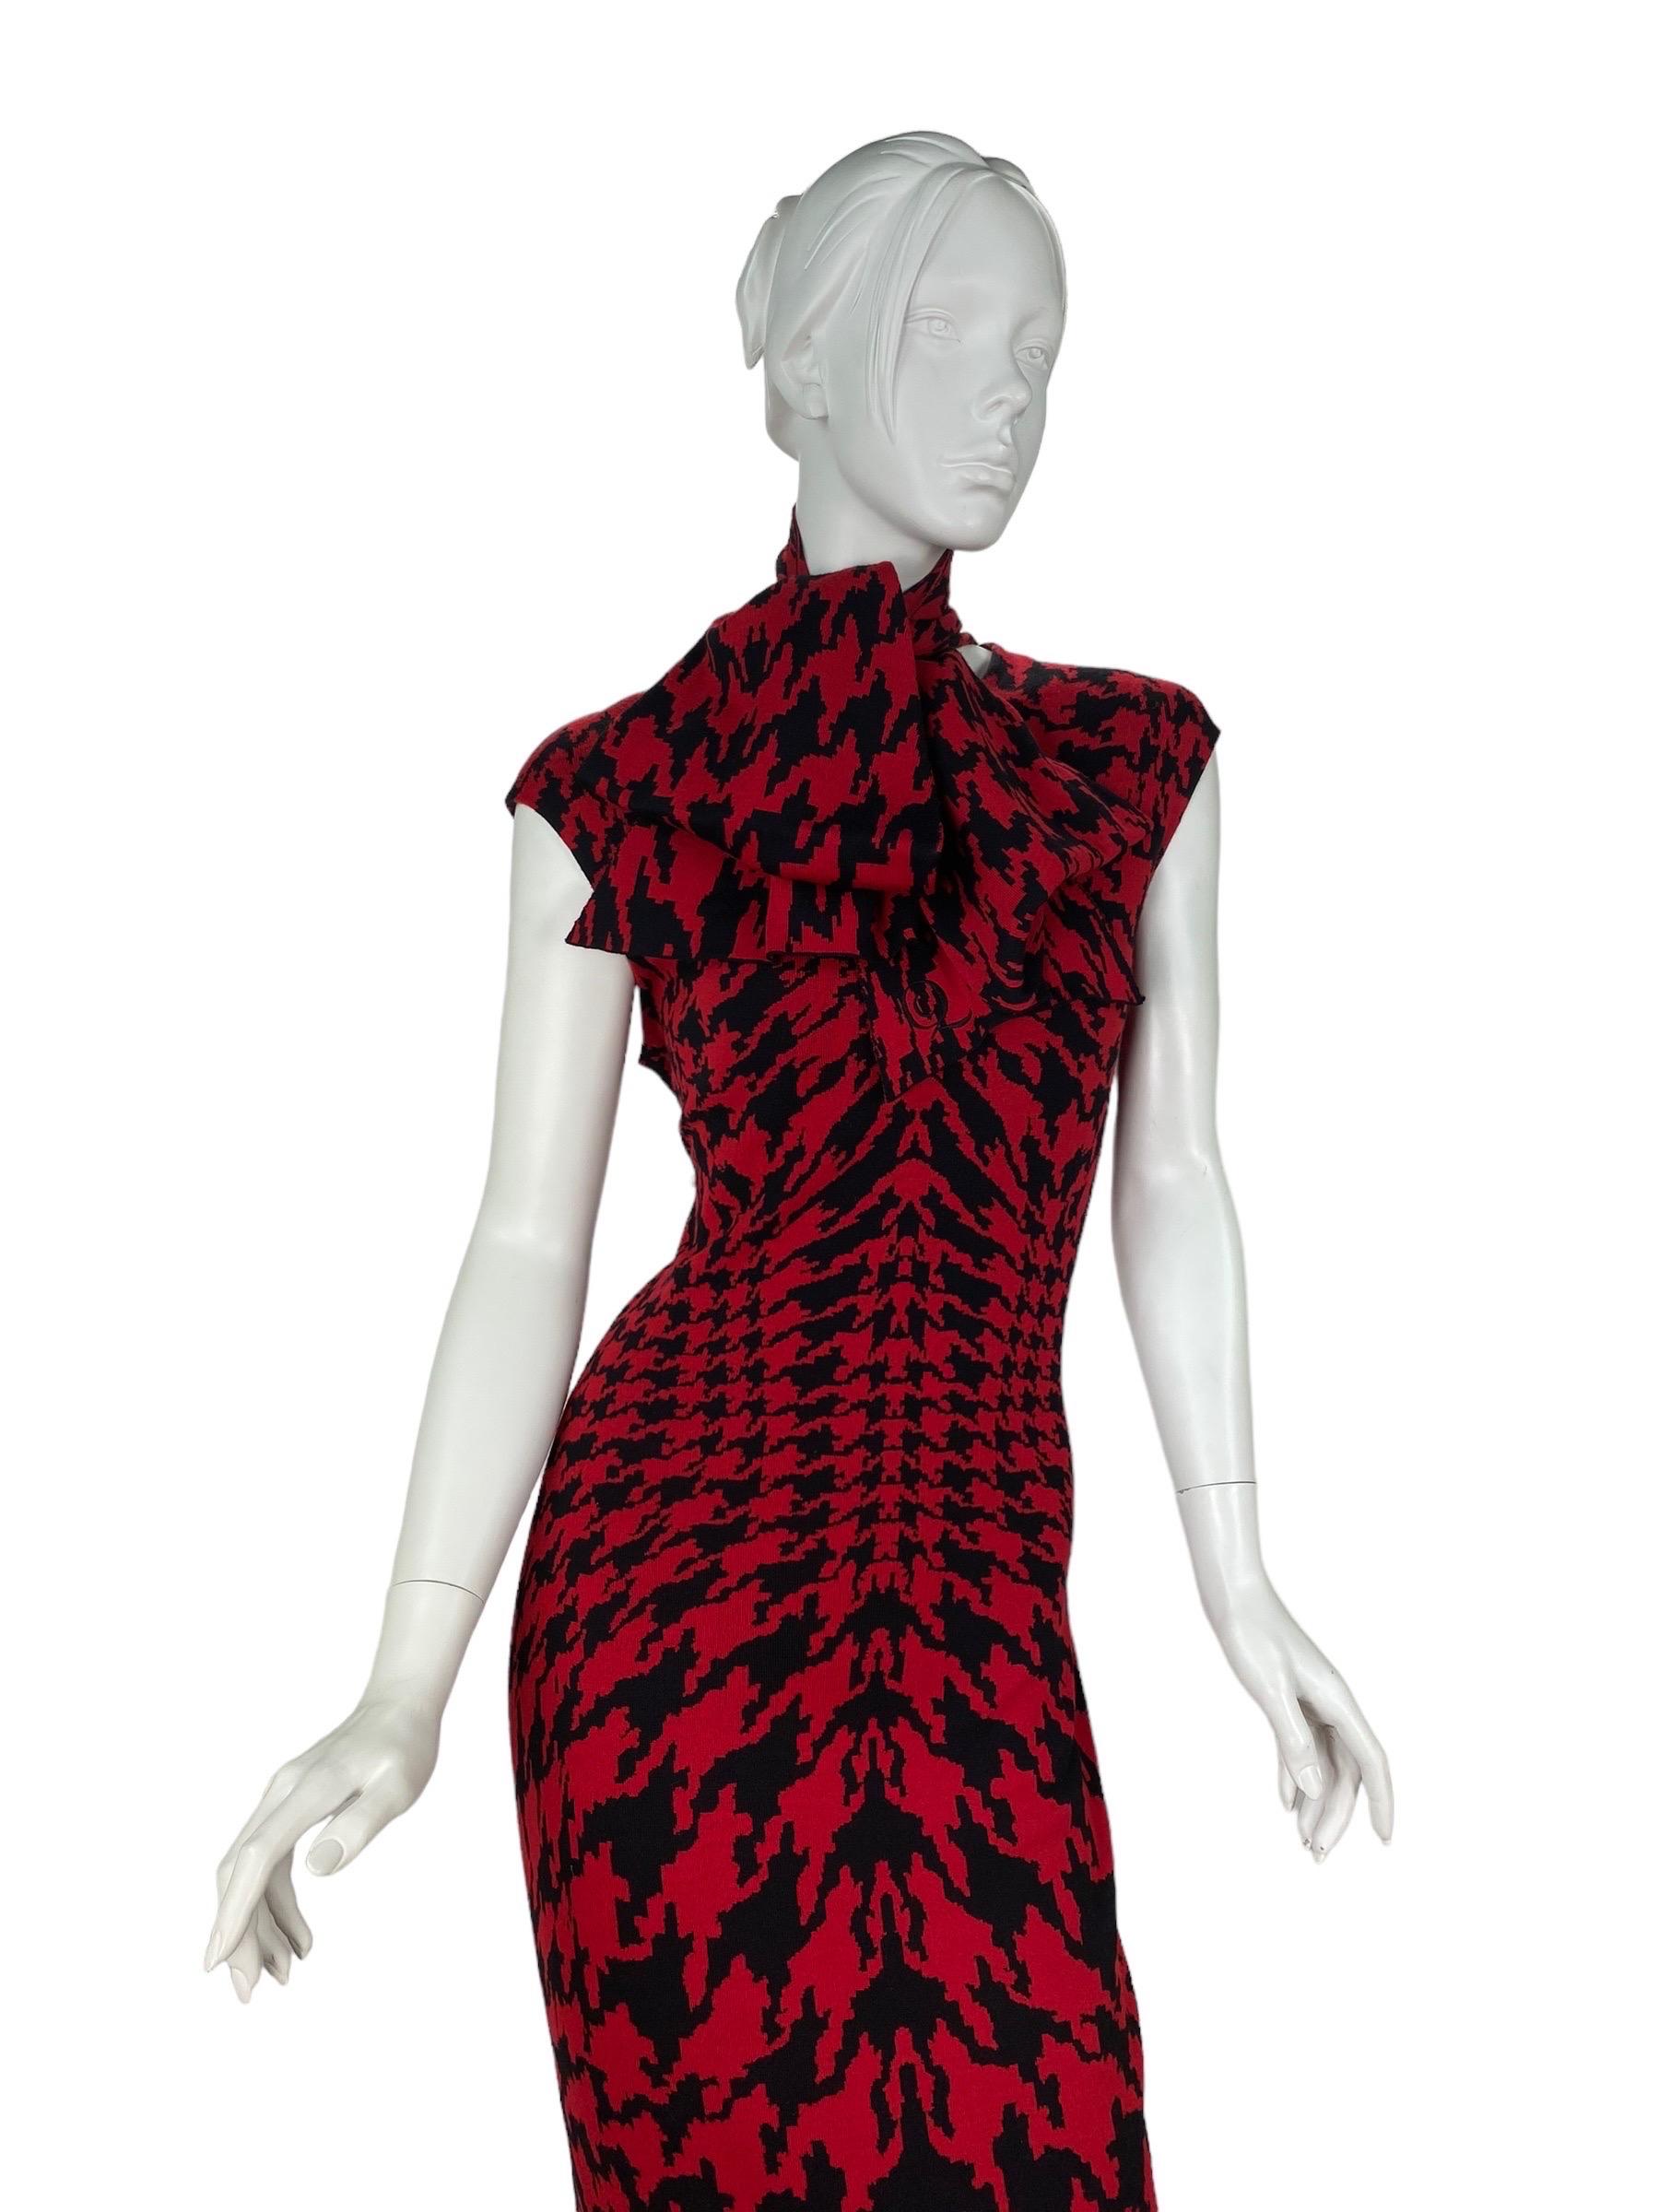 Women's F/W 2009 Iconic Alexander Mcqueen houndstooth print knit dress  For Sale